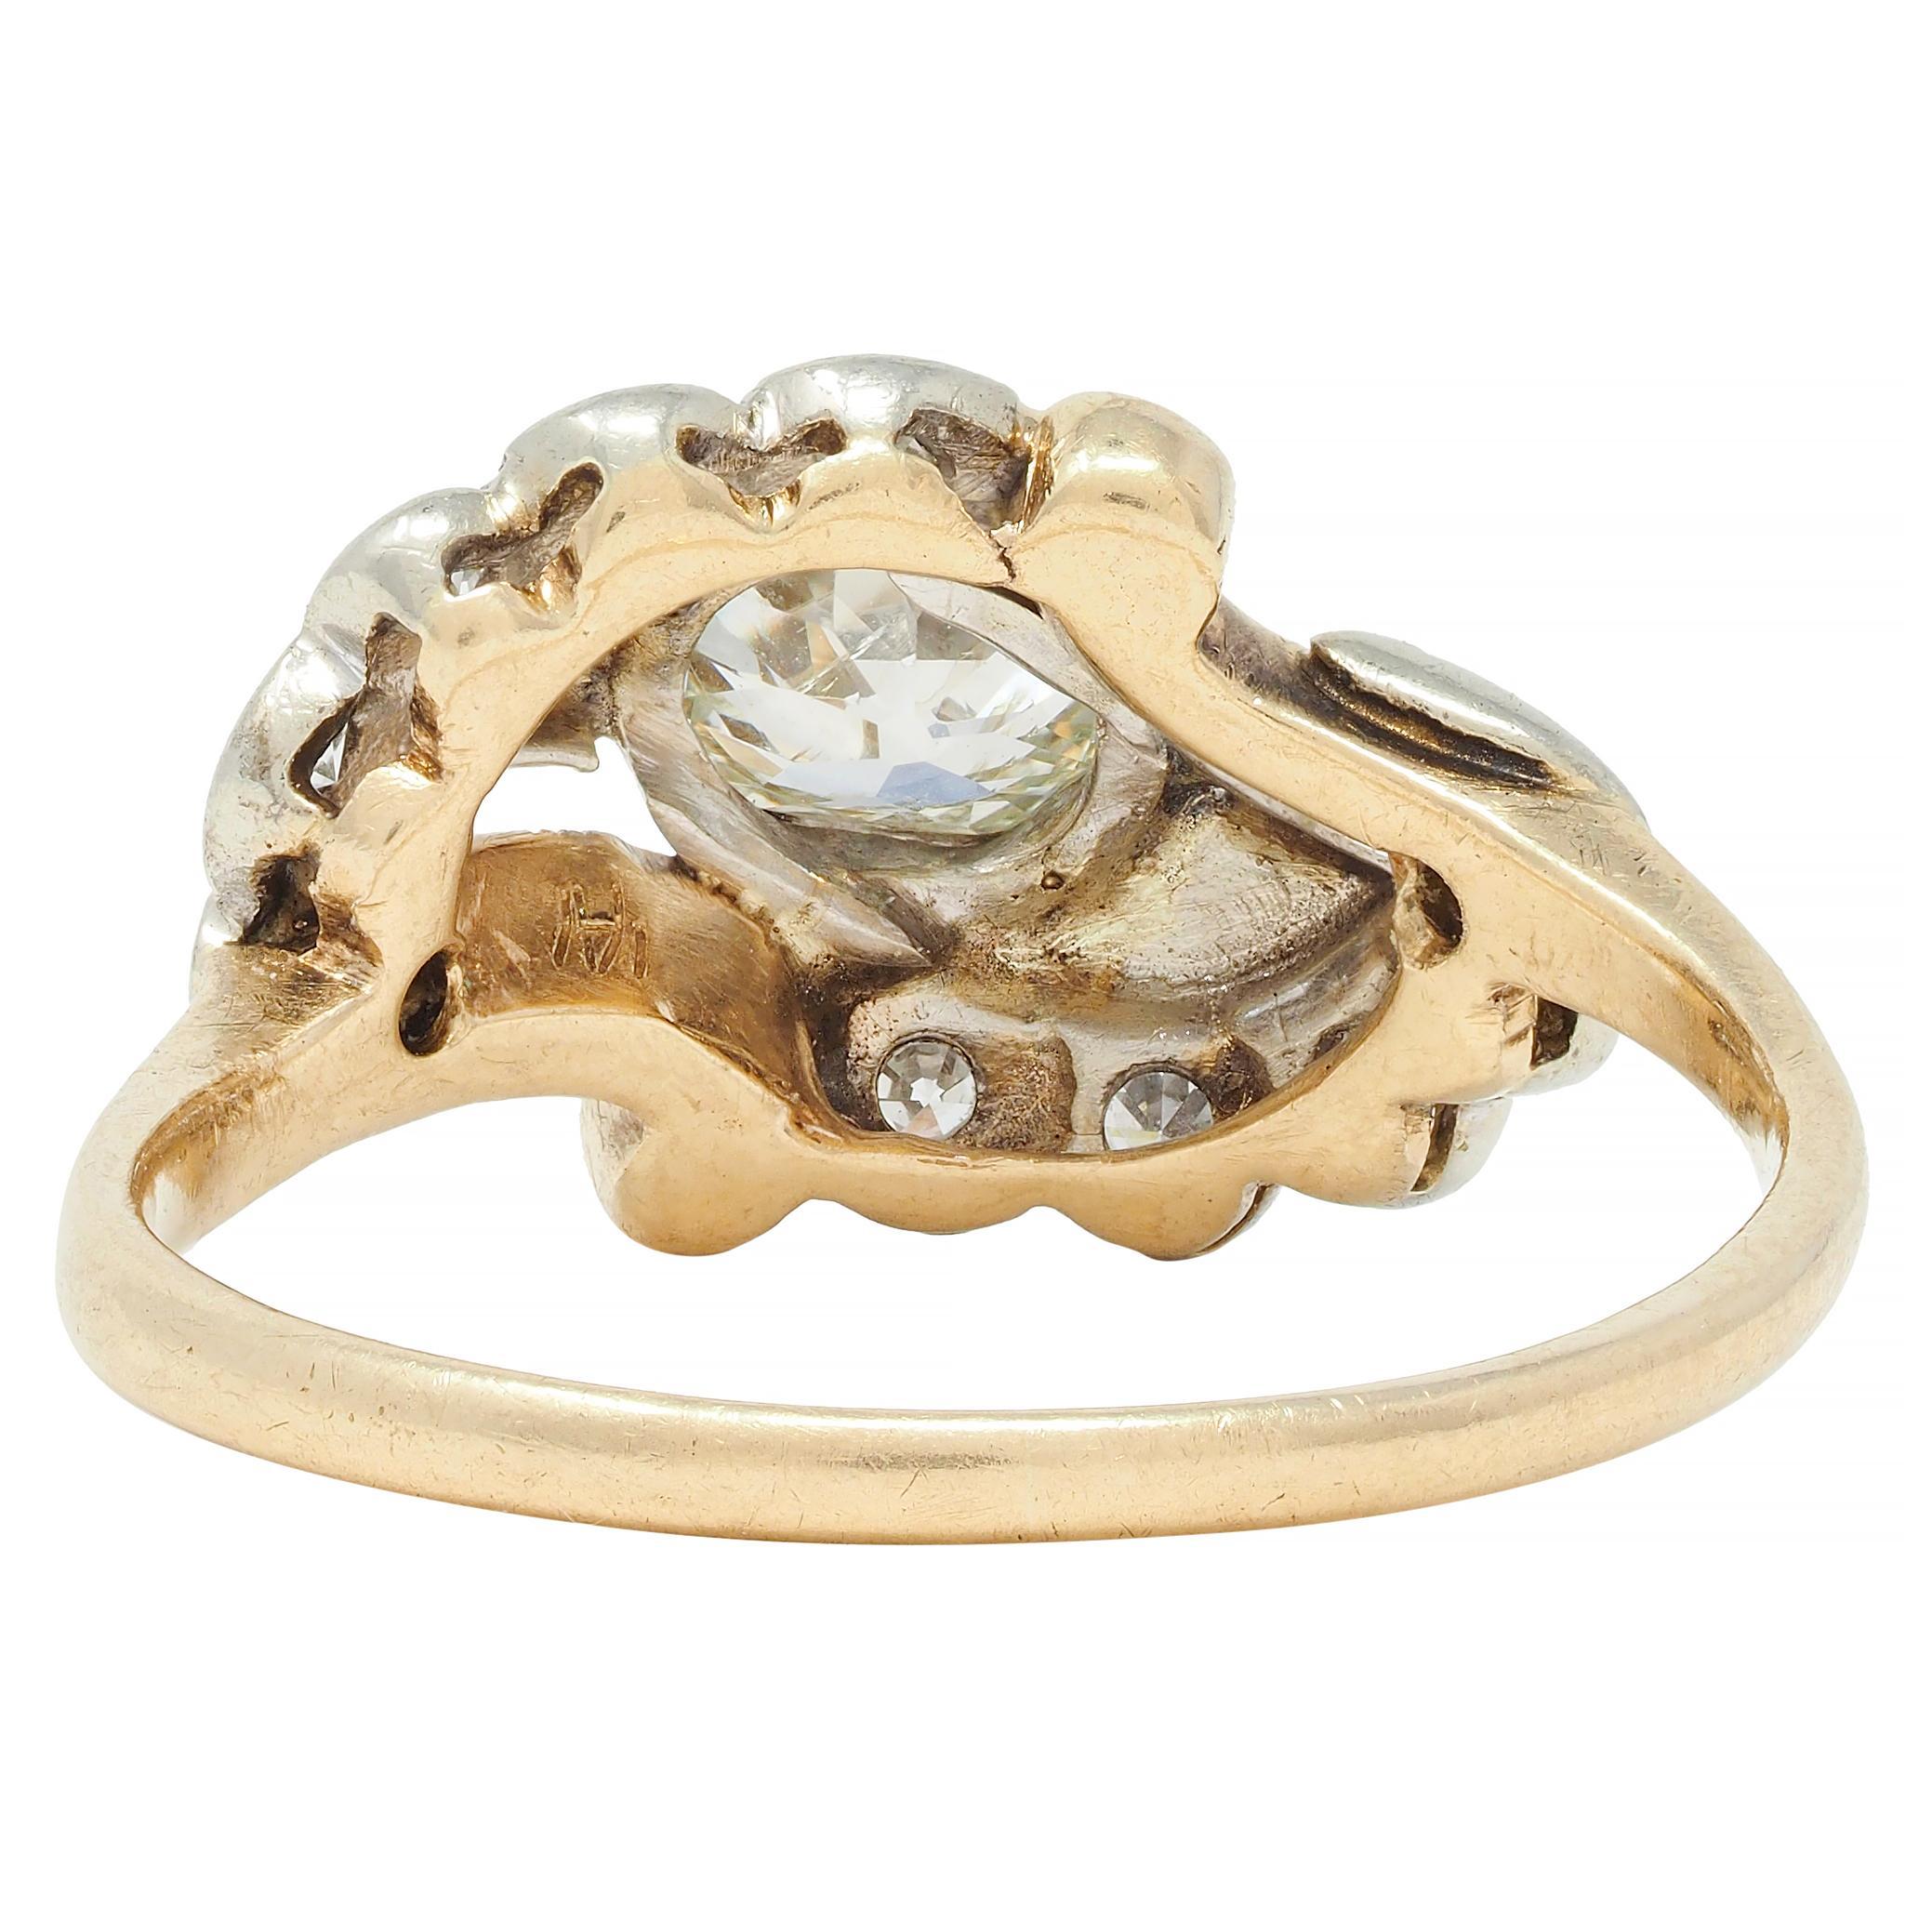 Early Art Deco 0.75 CTW Old Mine Cut Diamond 14 Karat Two-Tone Gold Bypass Ring For Sale 2